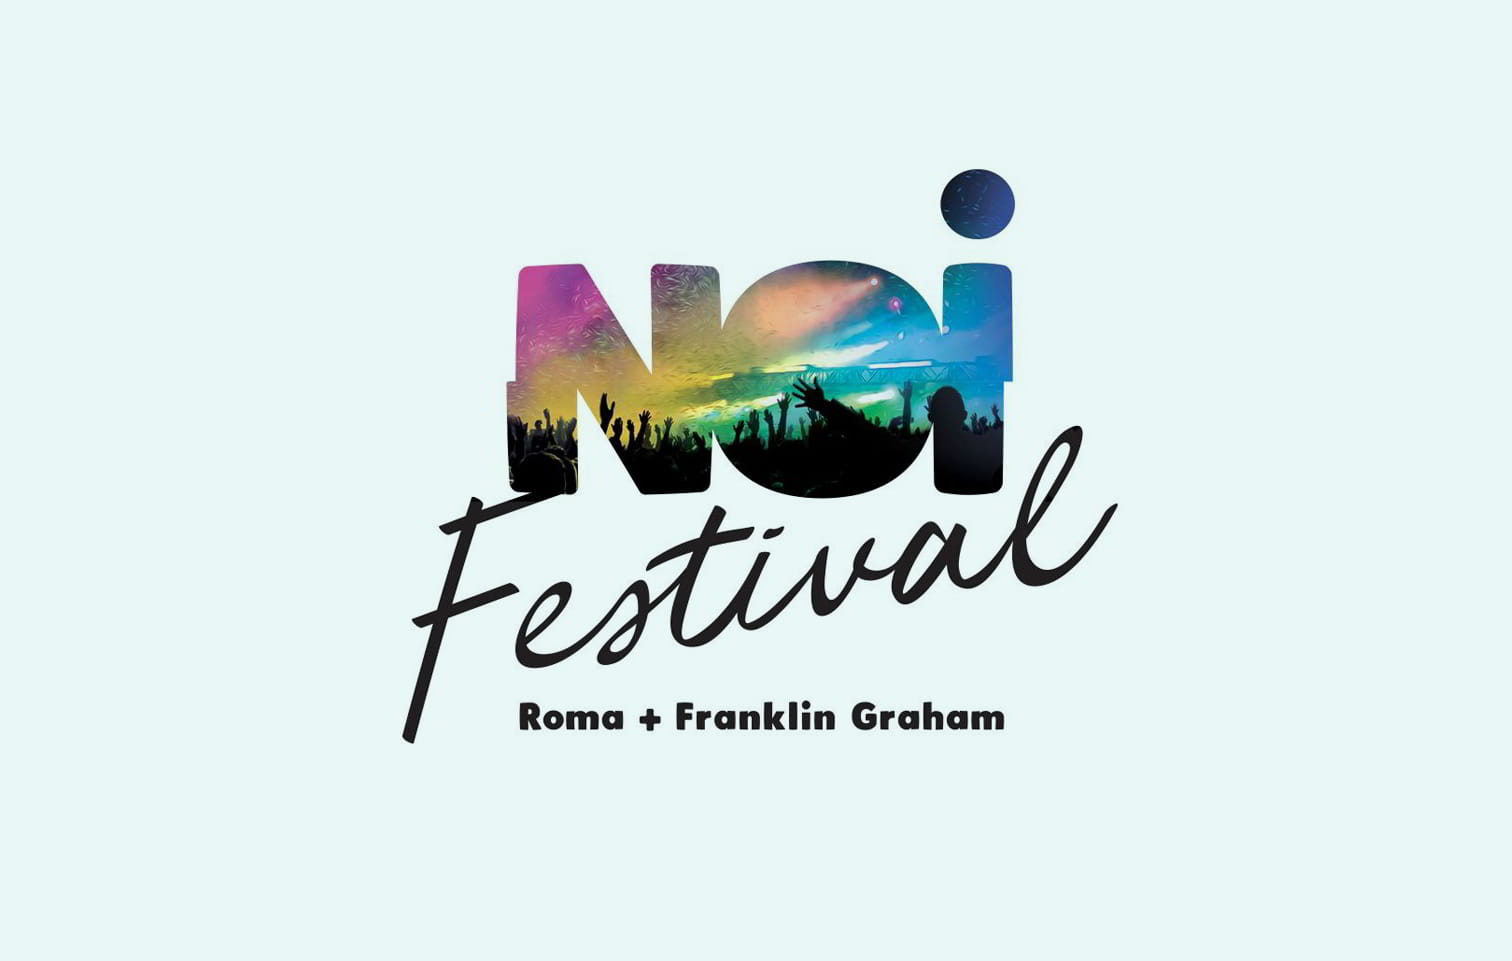 Noi Festival will feature live music from three-time Grammy winner Michael Smith and Kari Jobe, who has been nominated for two Grammy Awards.